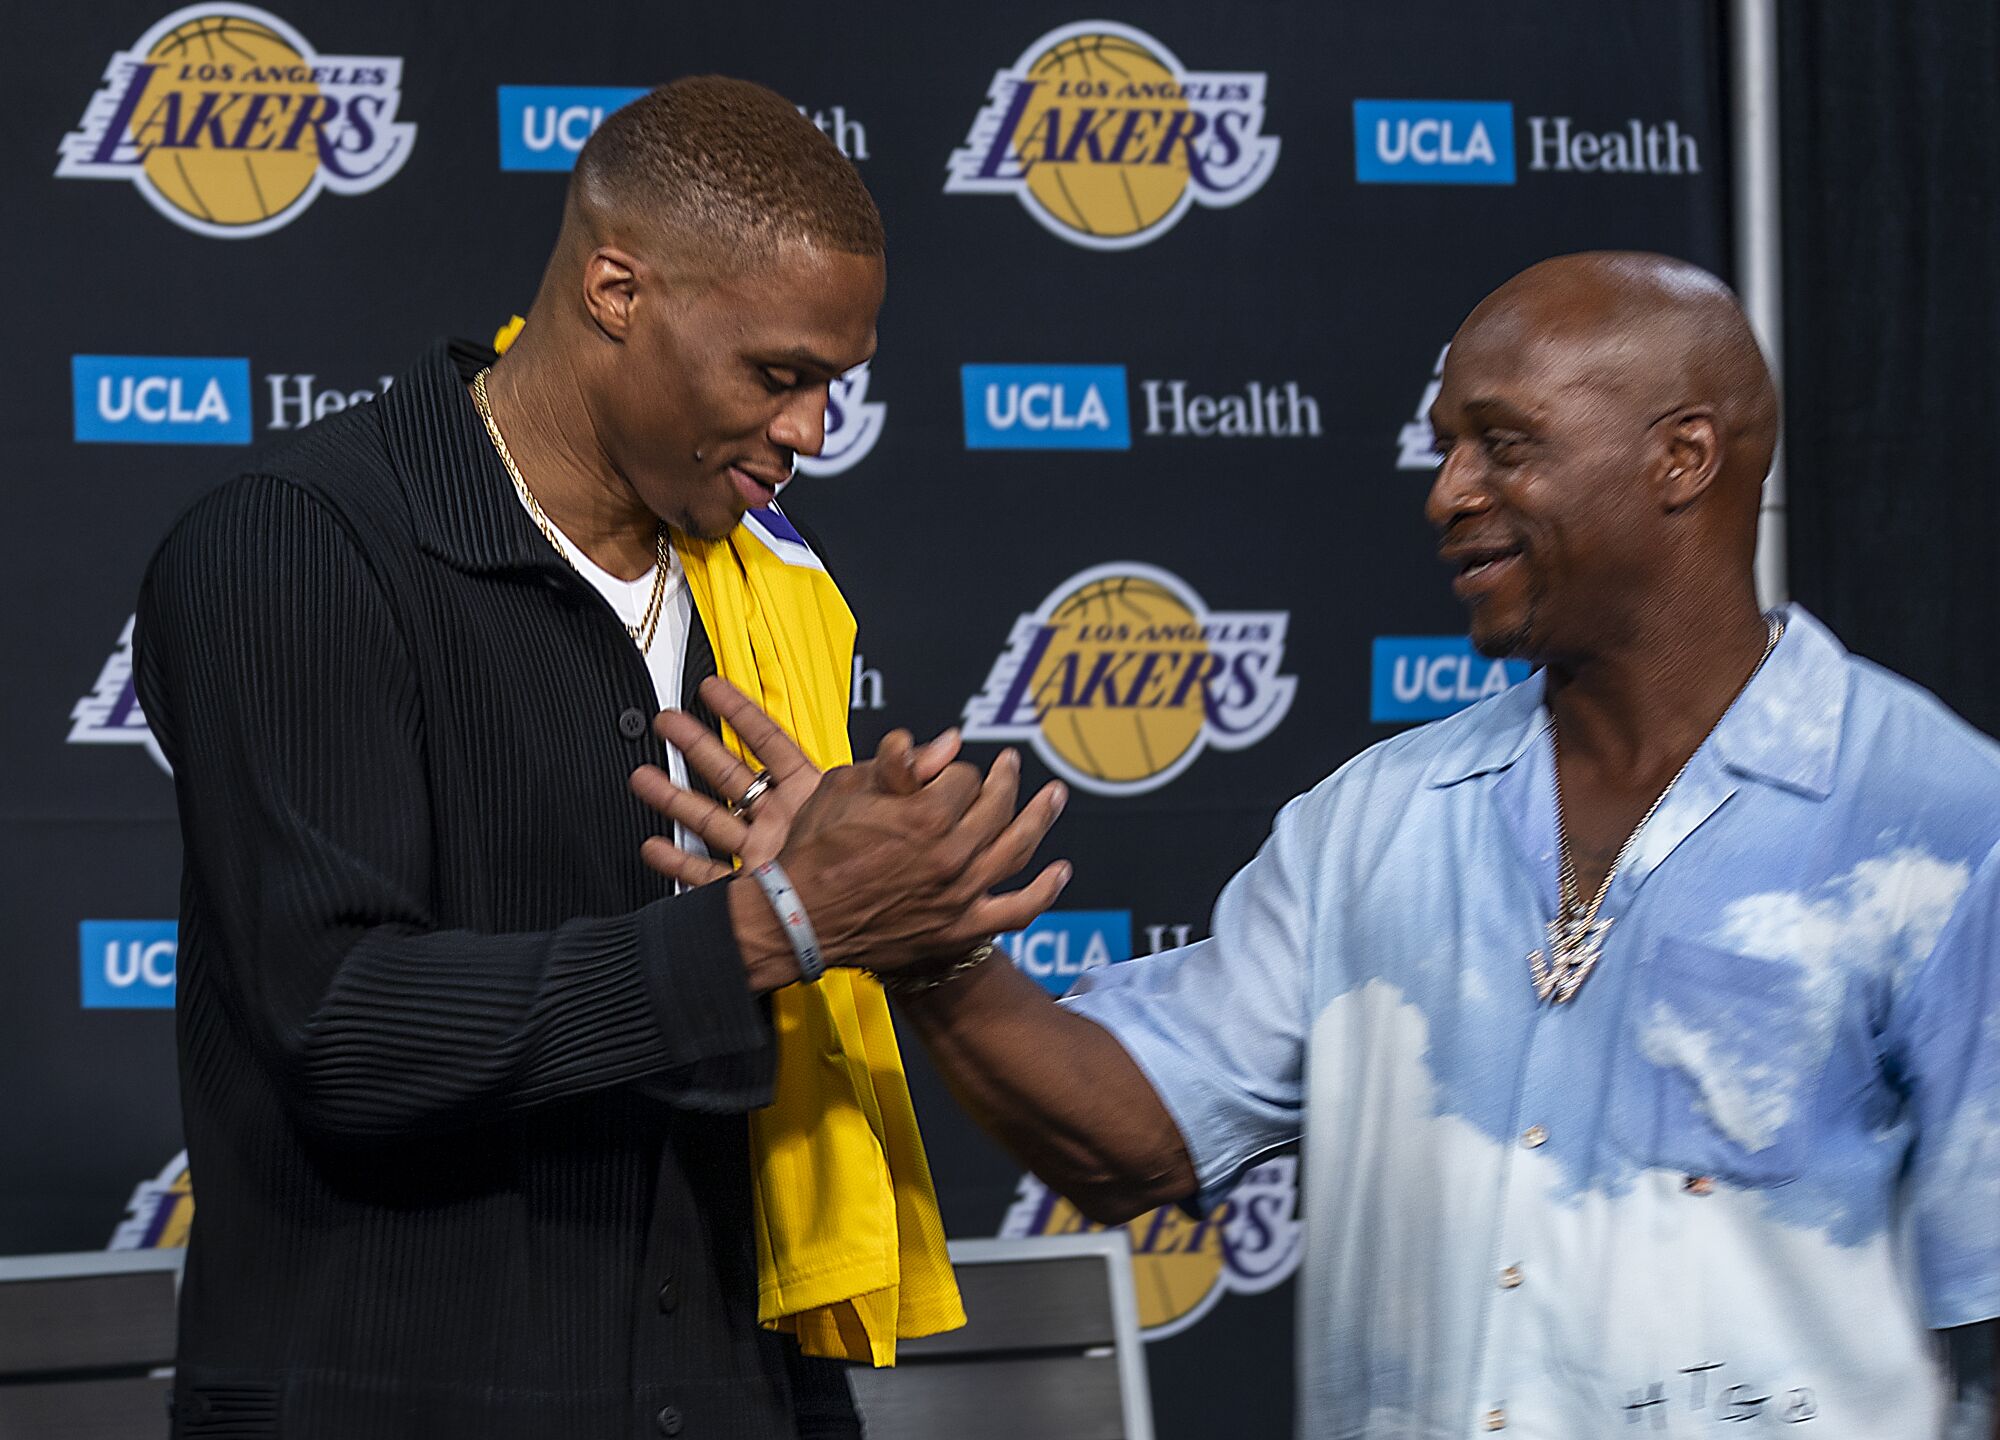 Russell Westbrook is greeted by his father, Russell, after receiving with his new Lakers jersey .